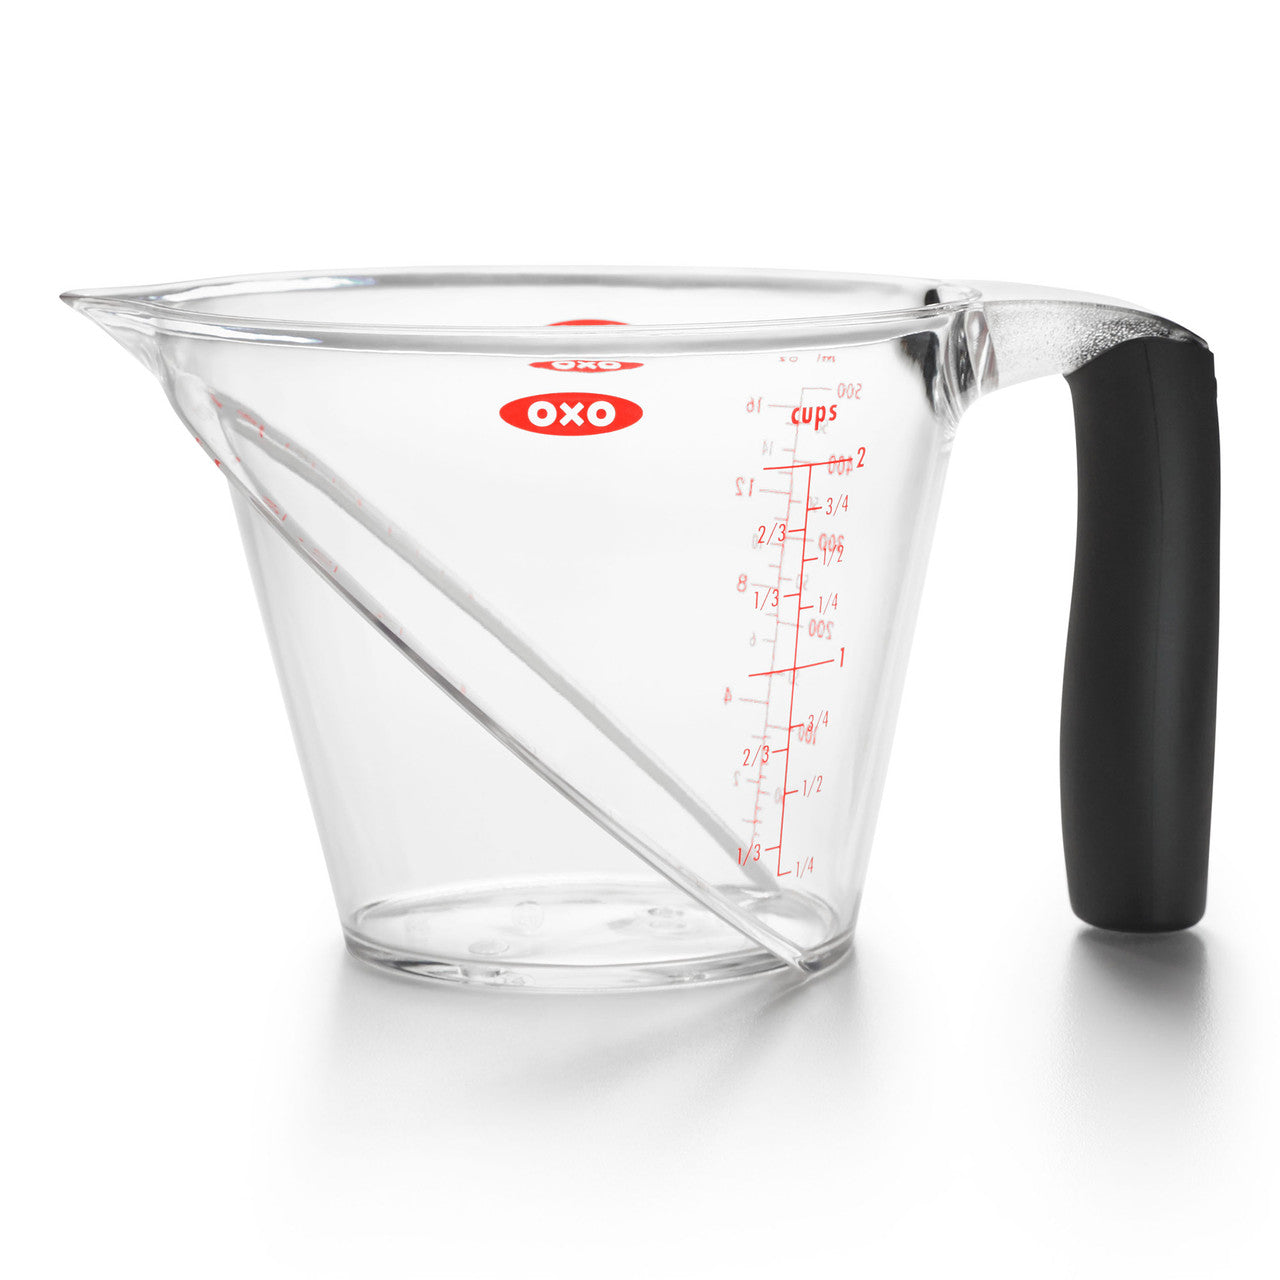 OXO Good Grips Angled Measuring Cup - 2 Cup/ 500ml